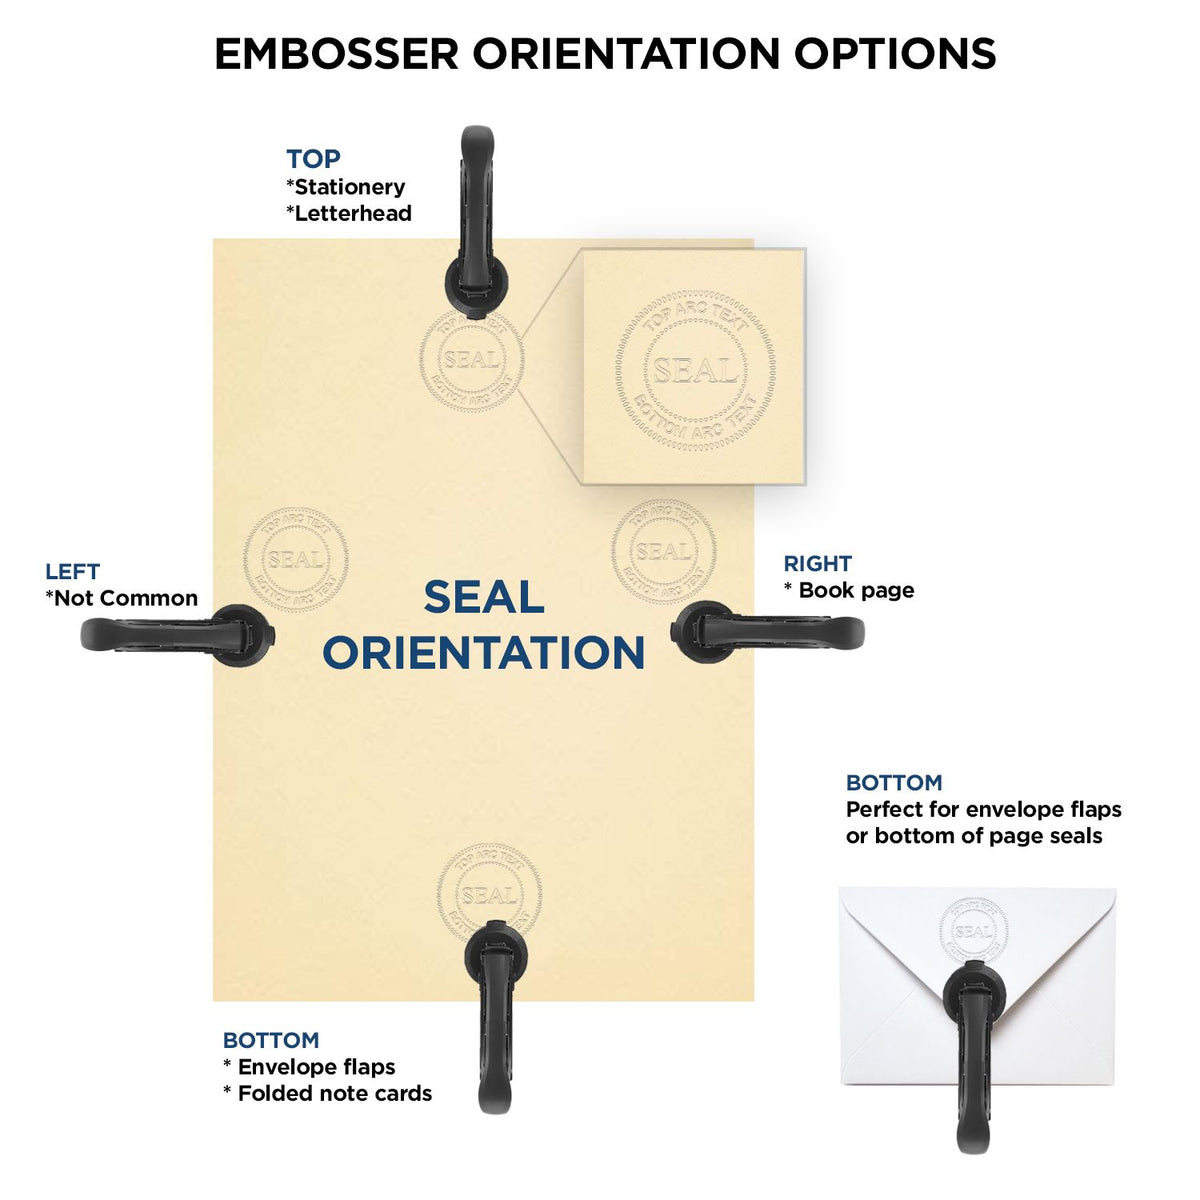 An infographic for the Handheld Idaho Professional Geologist Embosser showing embosser orientation, this is showing examples of a top, bottom, right and left insert.